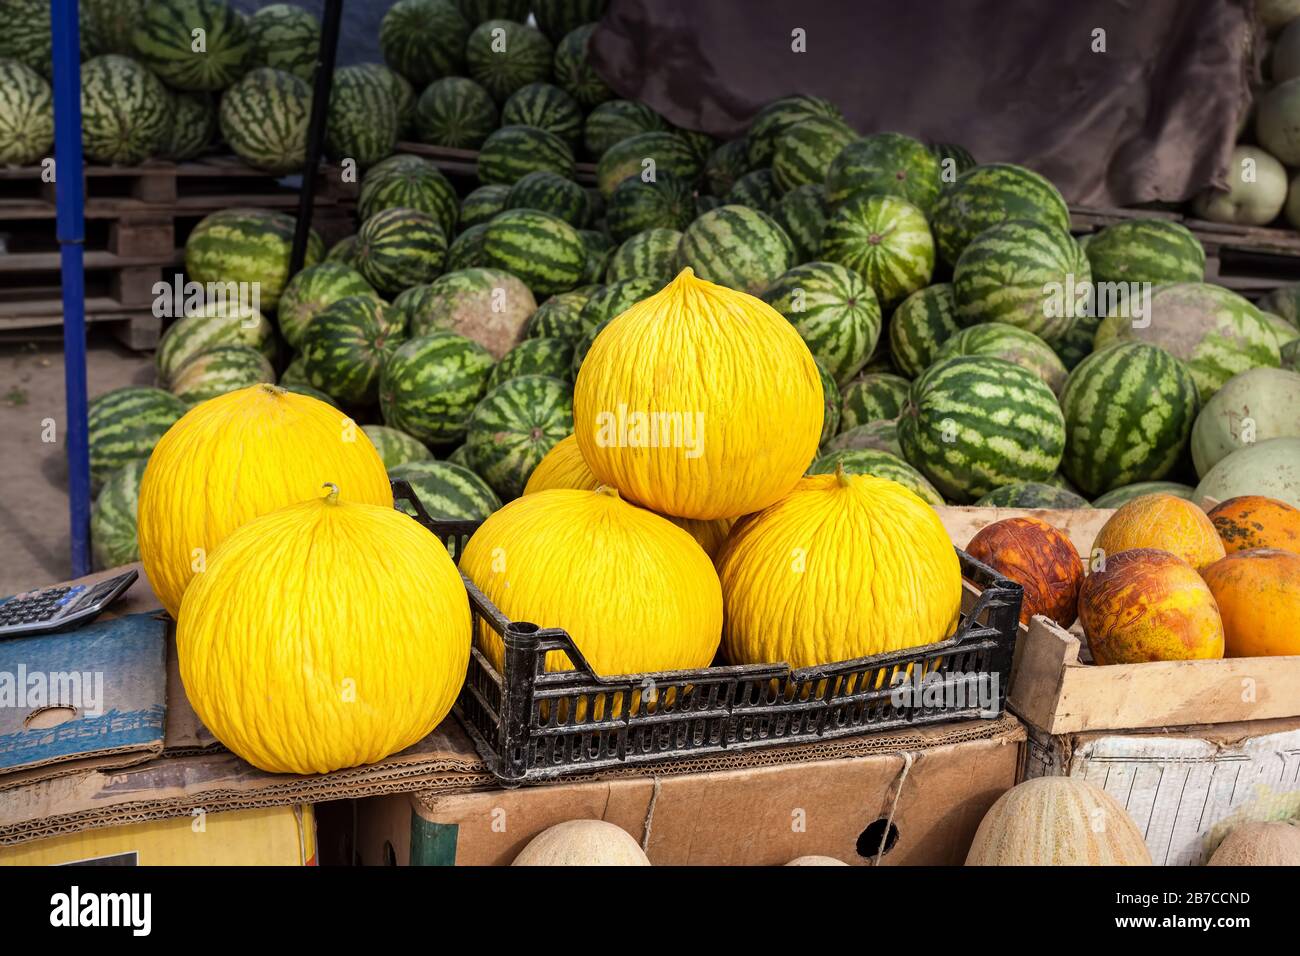 Fruit market with yellow melons and watermelons in Kazakhstan Stock Photo